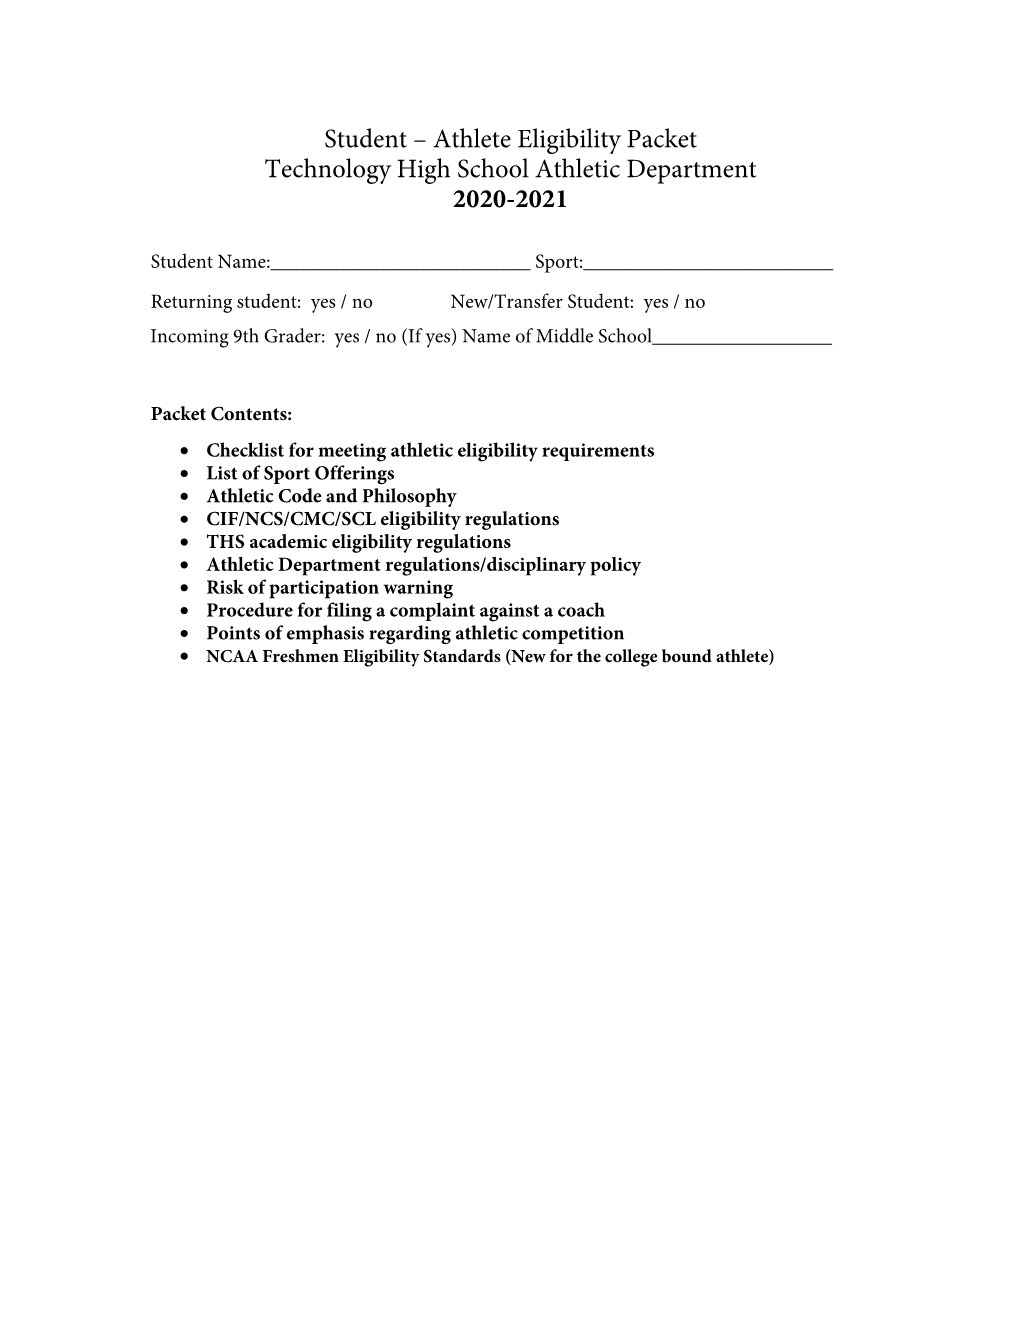 Student – Athlete Eligibility Packet Technology High School Athletic Department 2020-2021